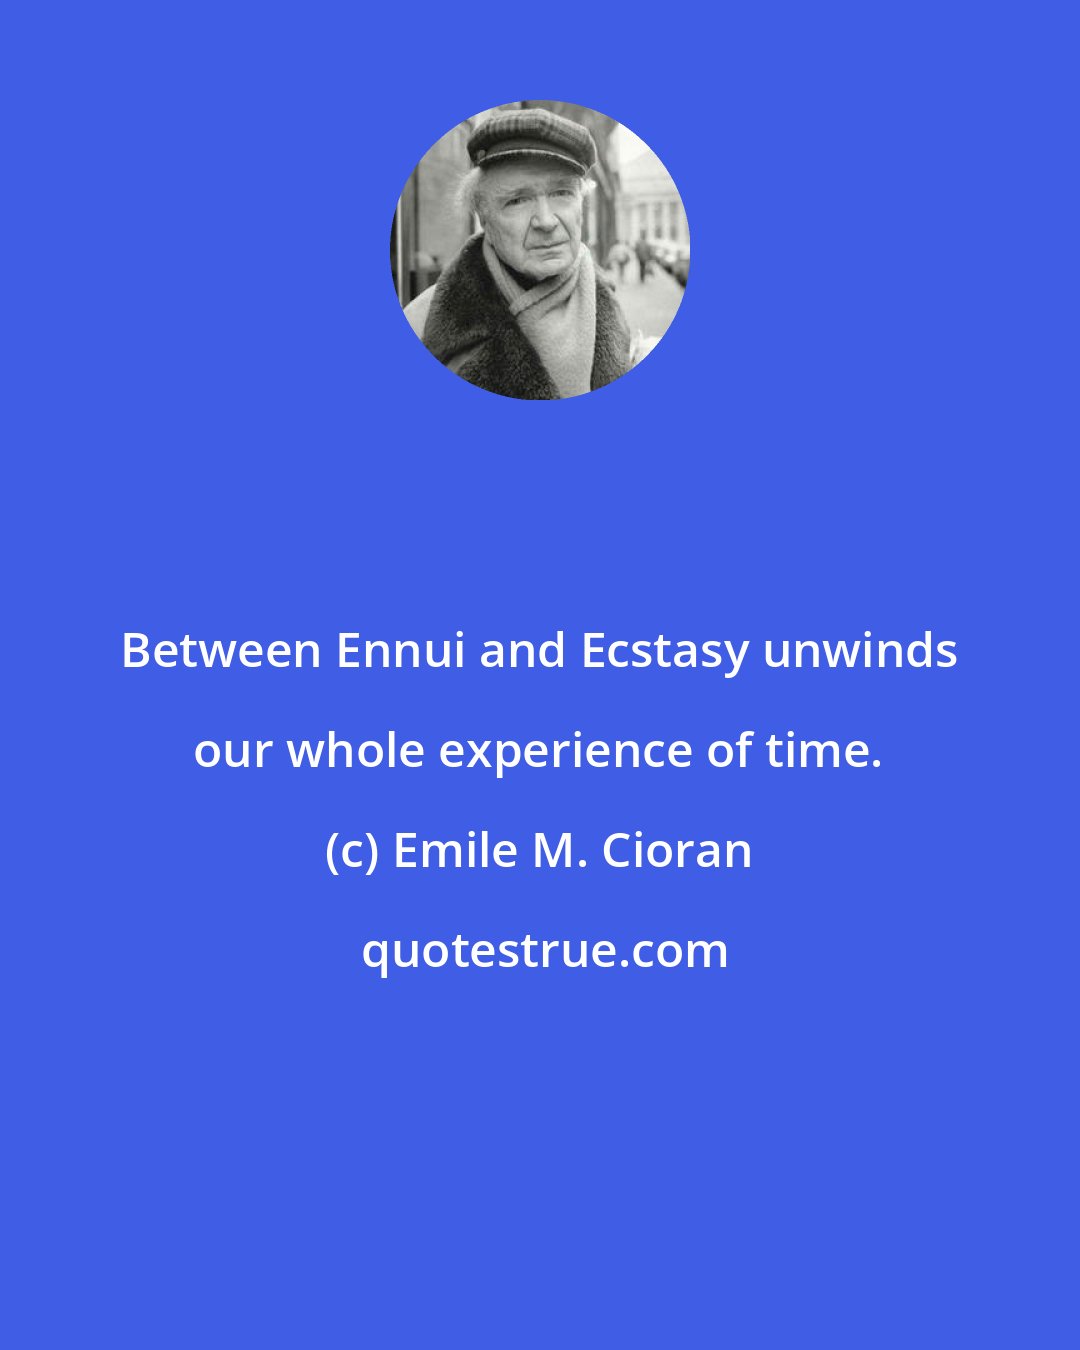 Emile M. Cioran: Between Ennui and Ecstasy unwinds our whole experience of time.